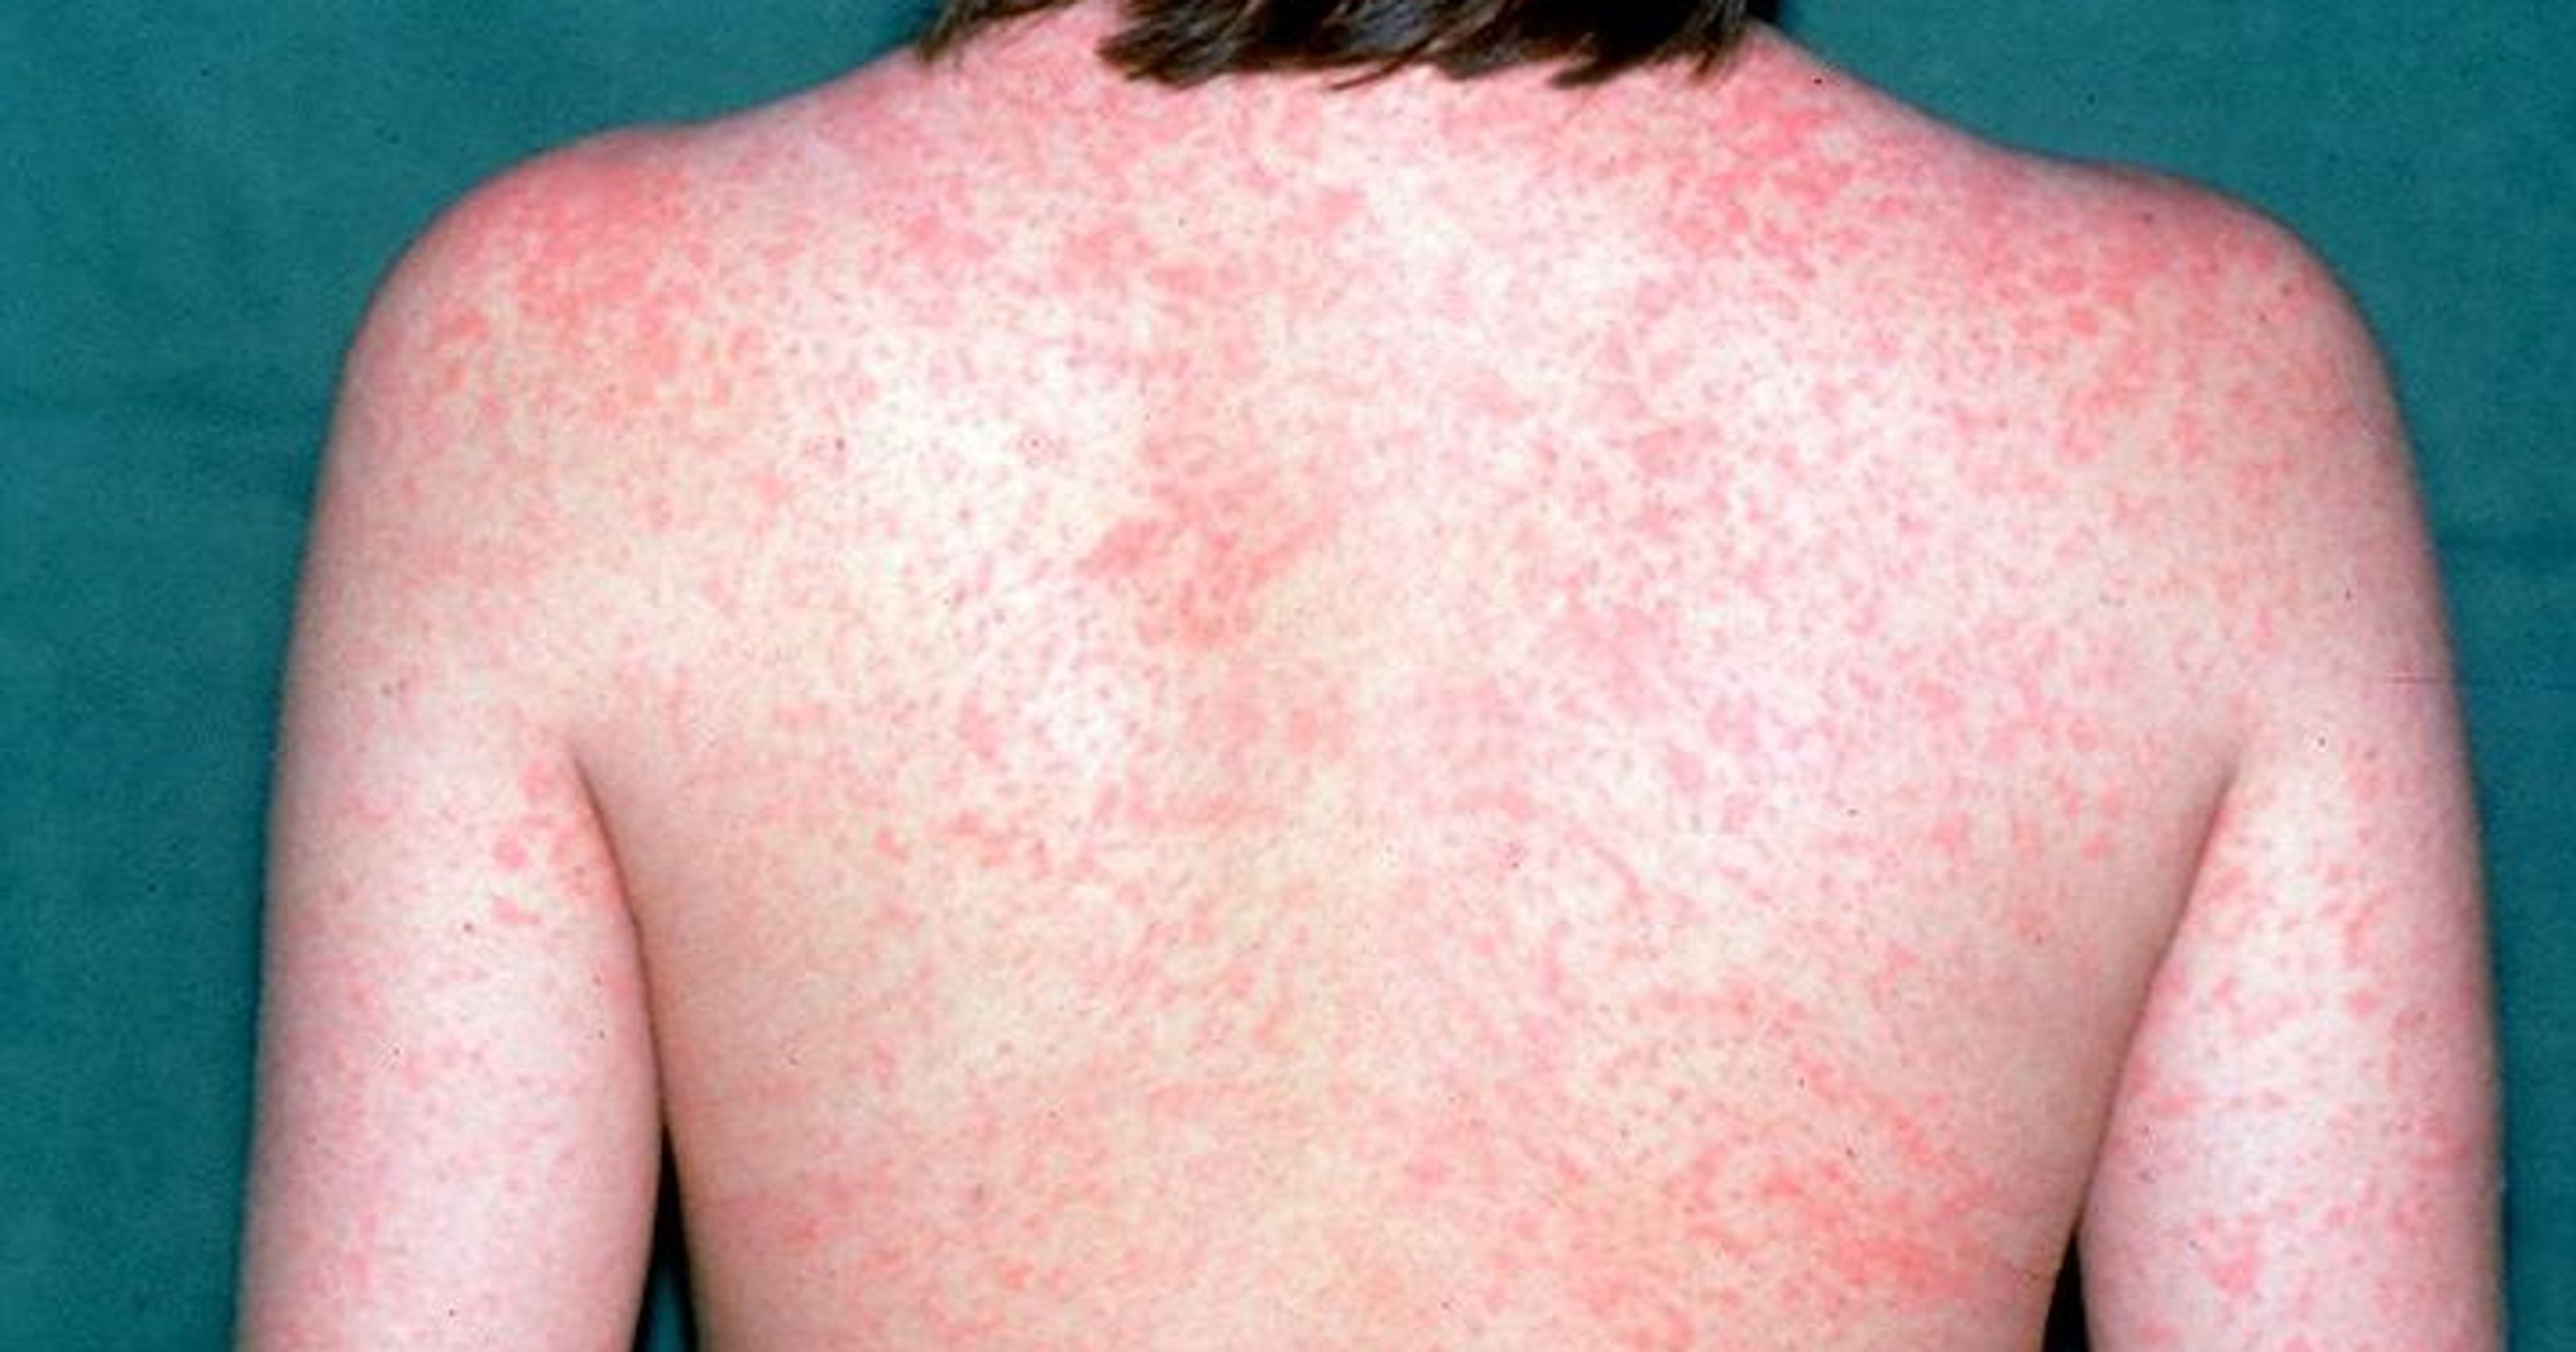 Measles health alert issued in two states